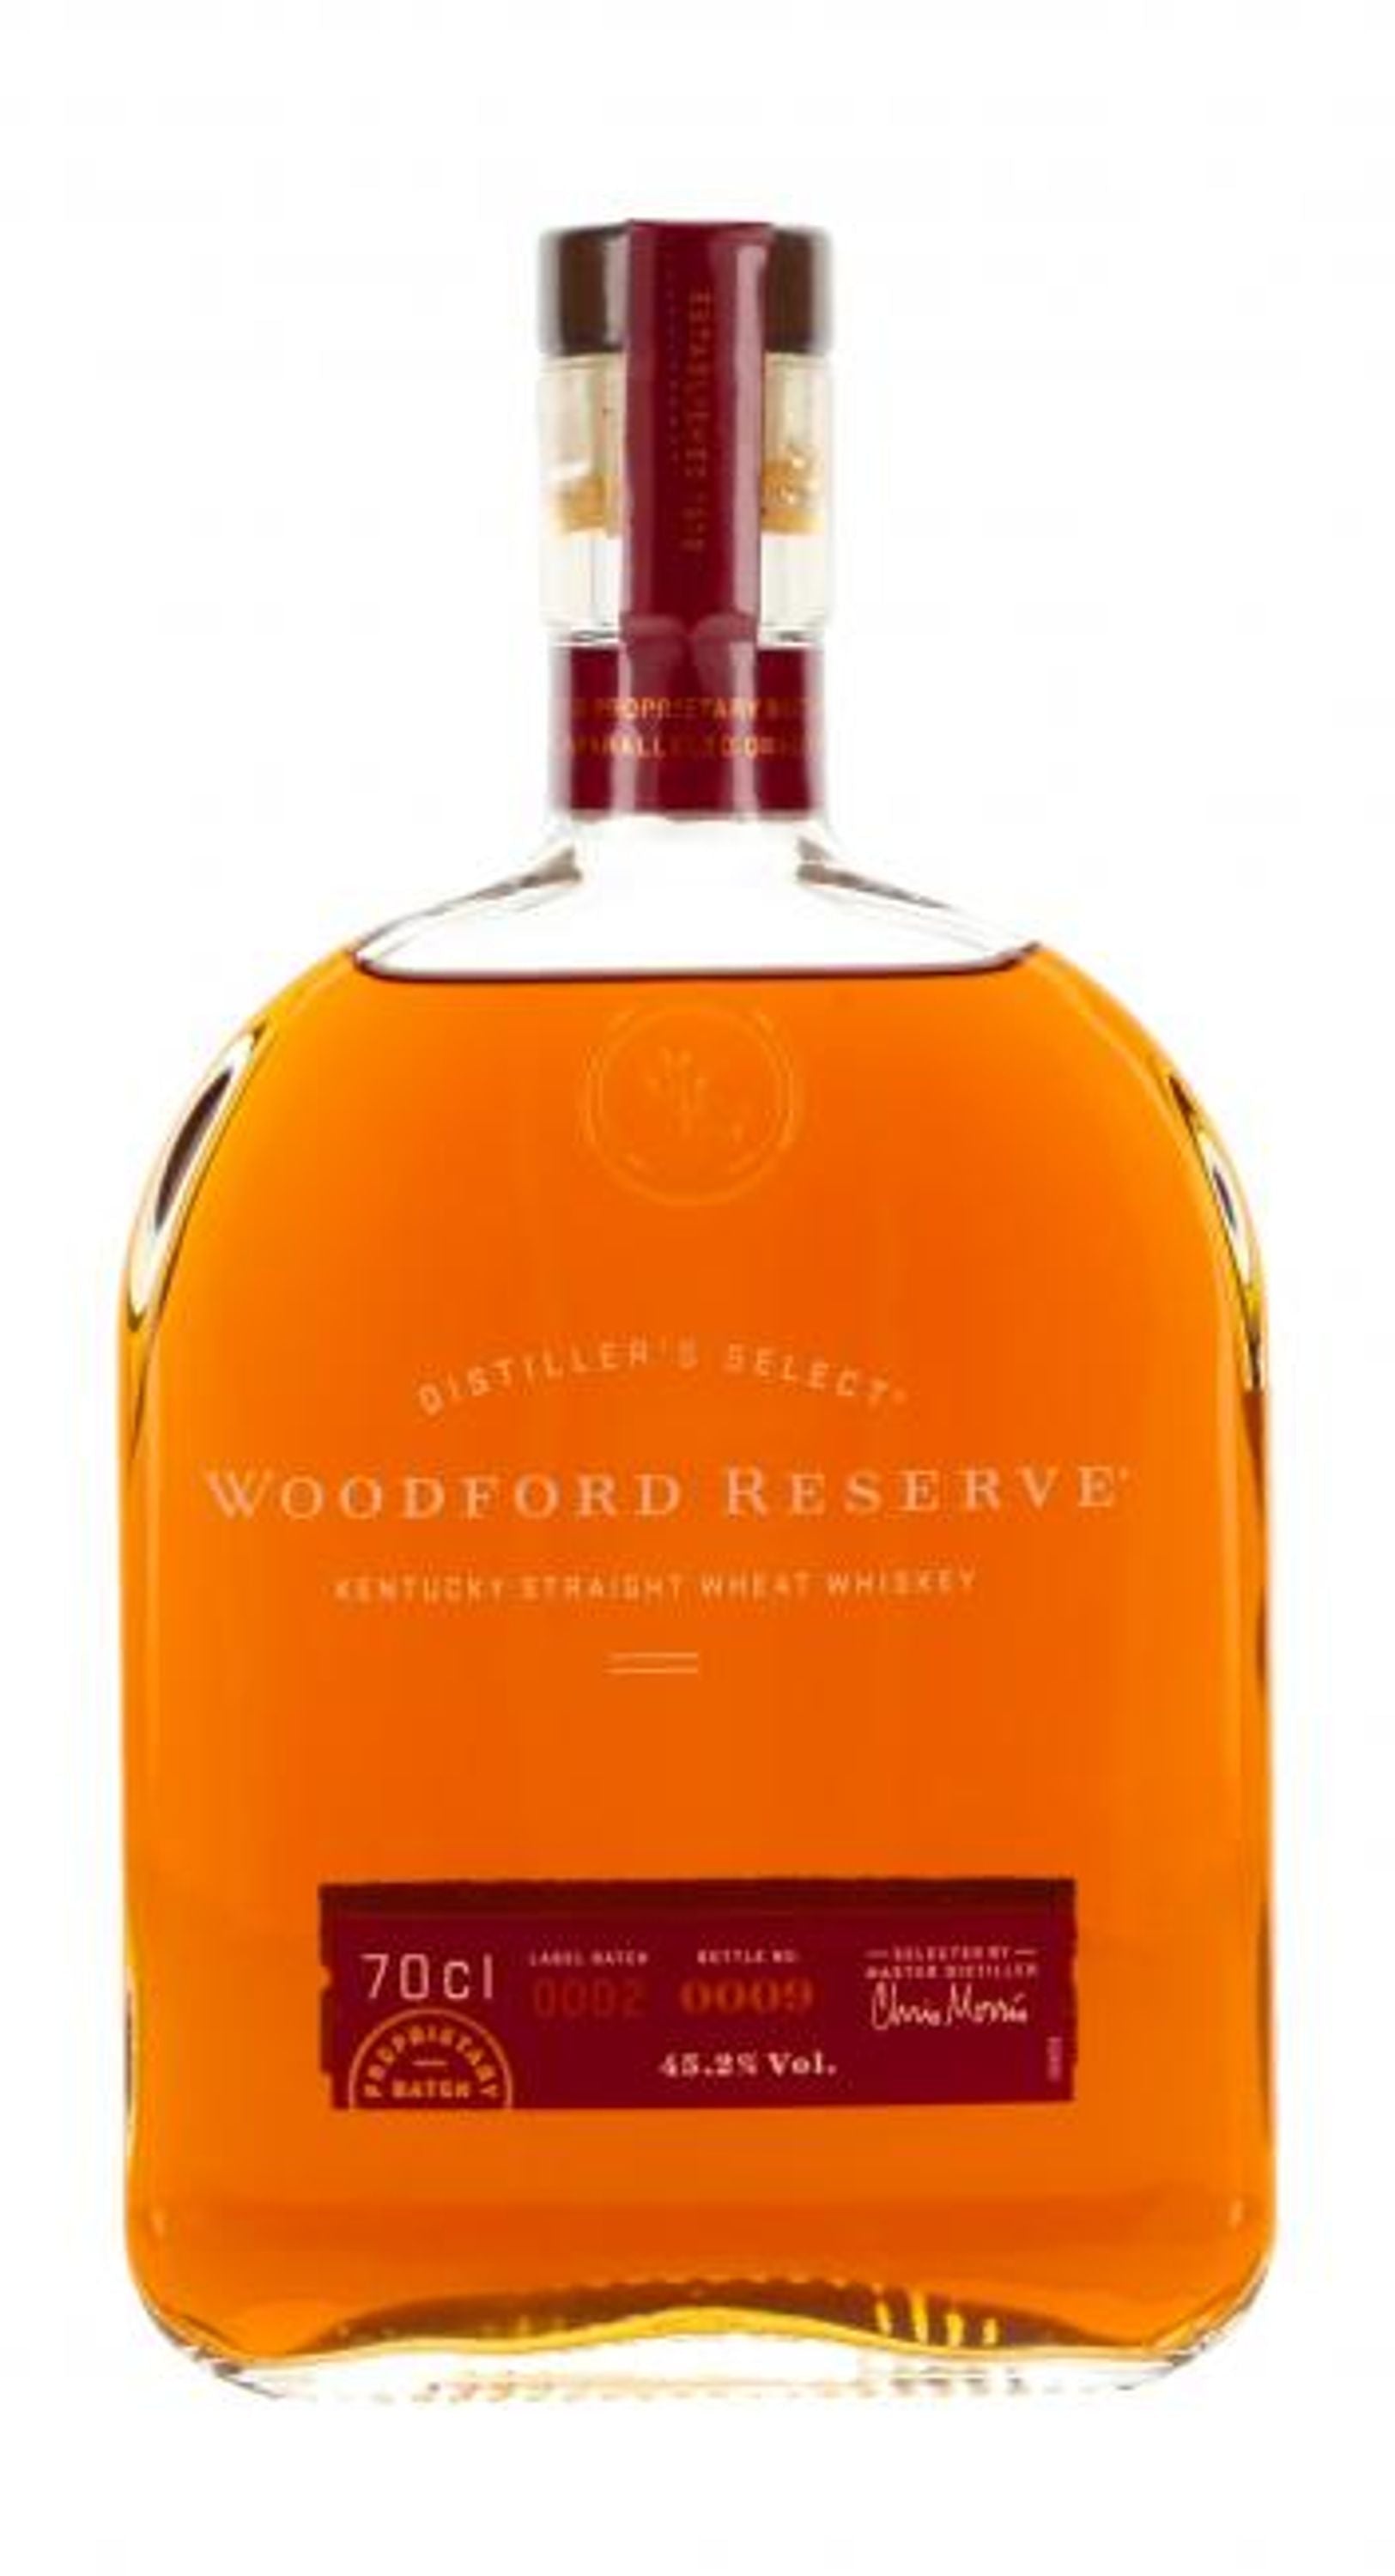 Woodford Reserve Kentucky Straight Wheat Whiskey 0.7l, alc. 45.2% vol.